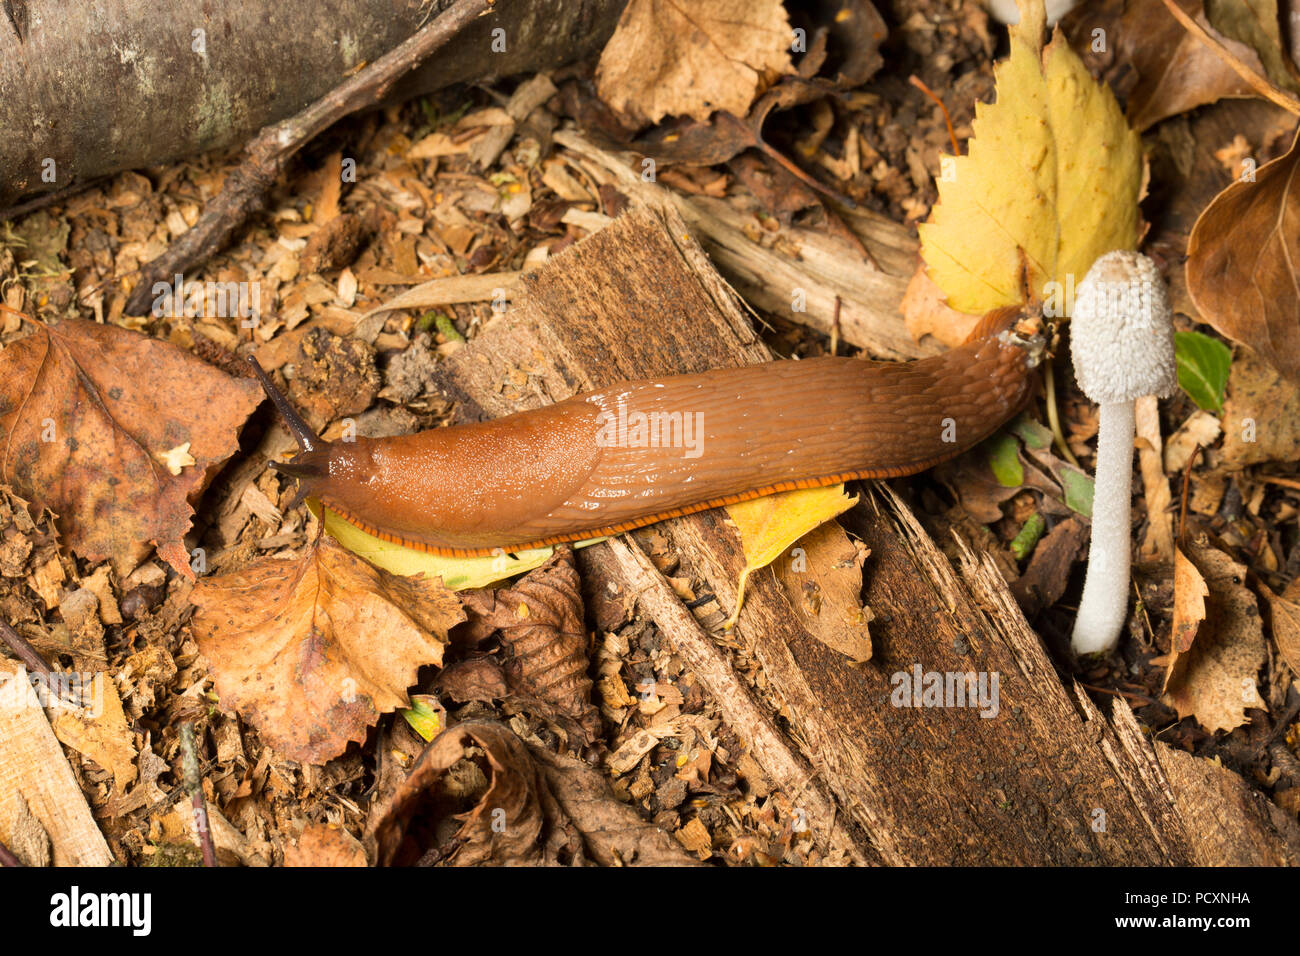 A Large Red Slug, Arion ater, crawling at night on the edge of a woodpile near fungi during the UK 2018 hot weather in a garden in Lancashire England  Stock Photo